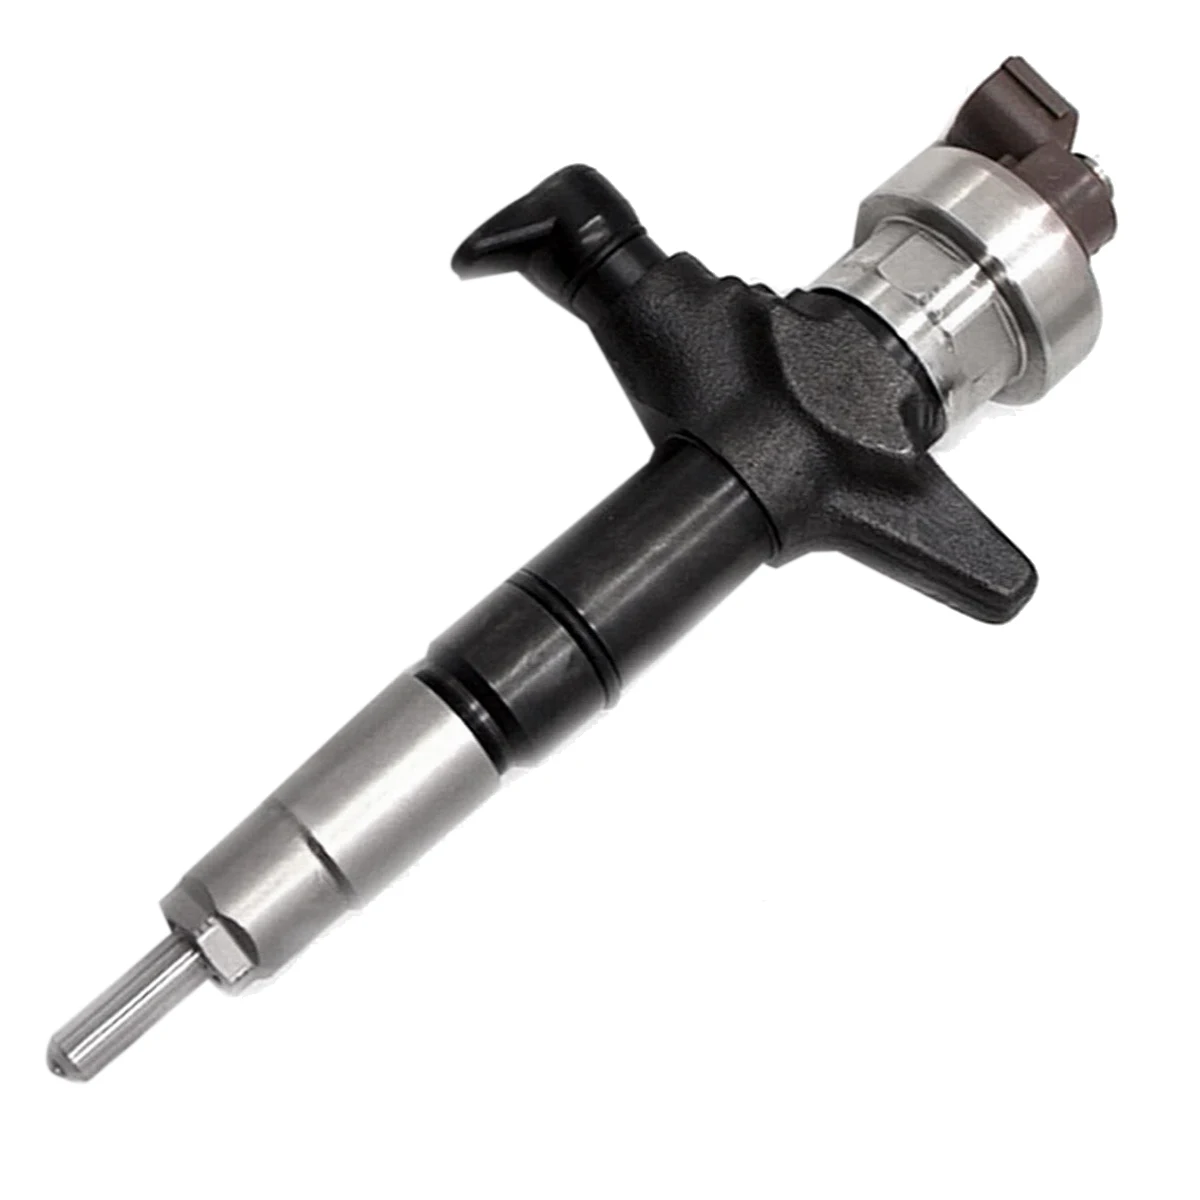 

295050-1710 New Diesel Fuel Injector Nozzle for Isuzu Truck NLR85 with 4JJ1 Engine 8-98238318-0